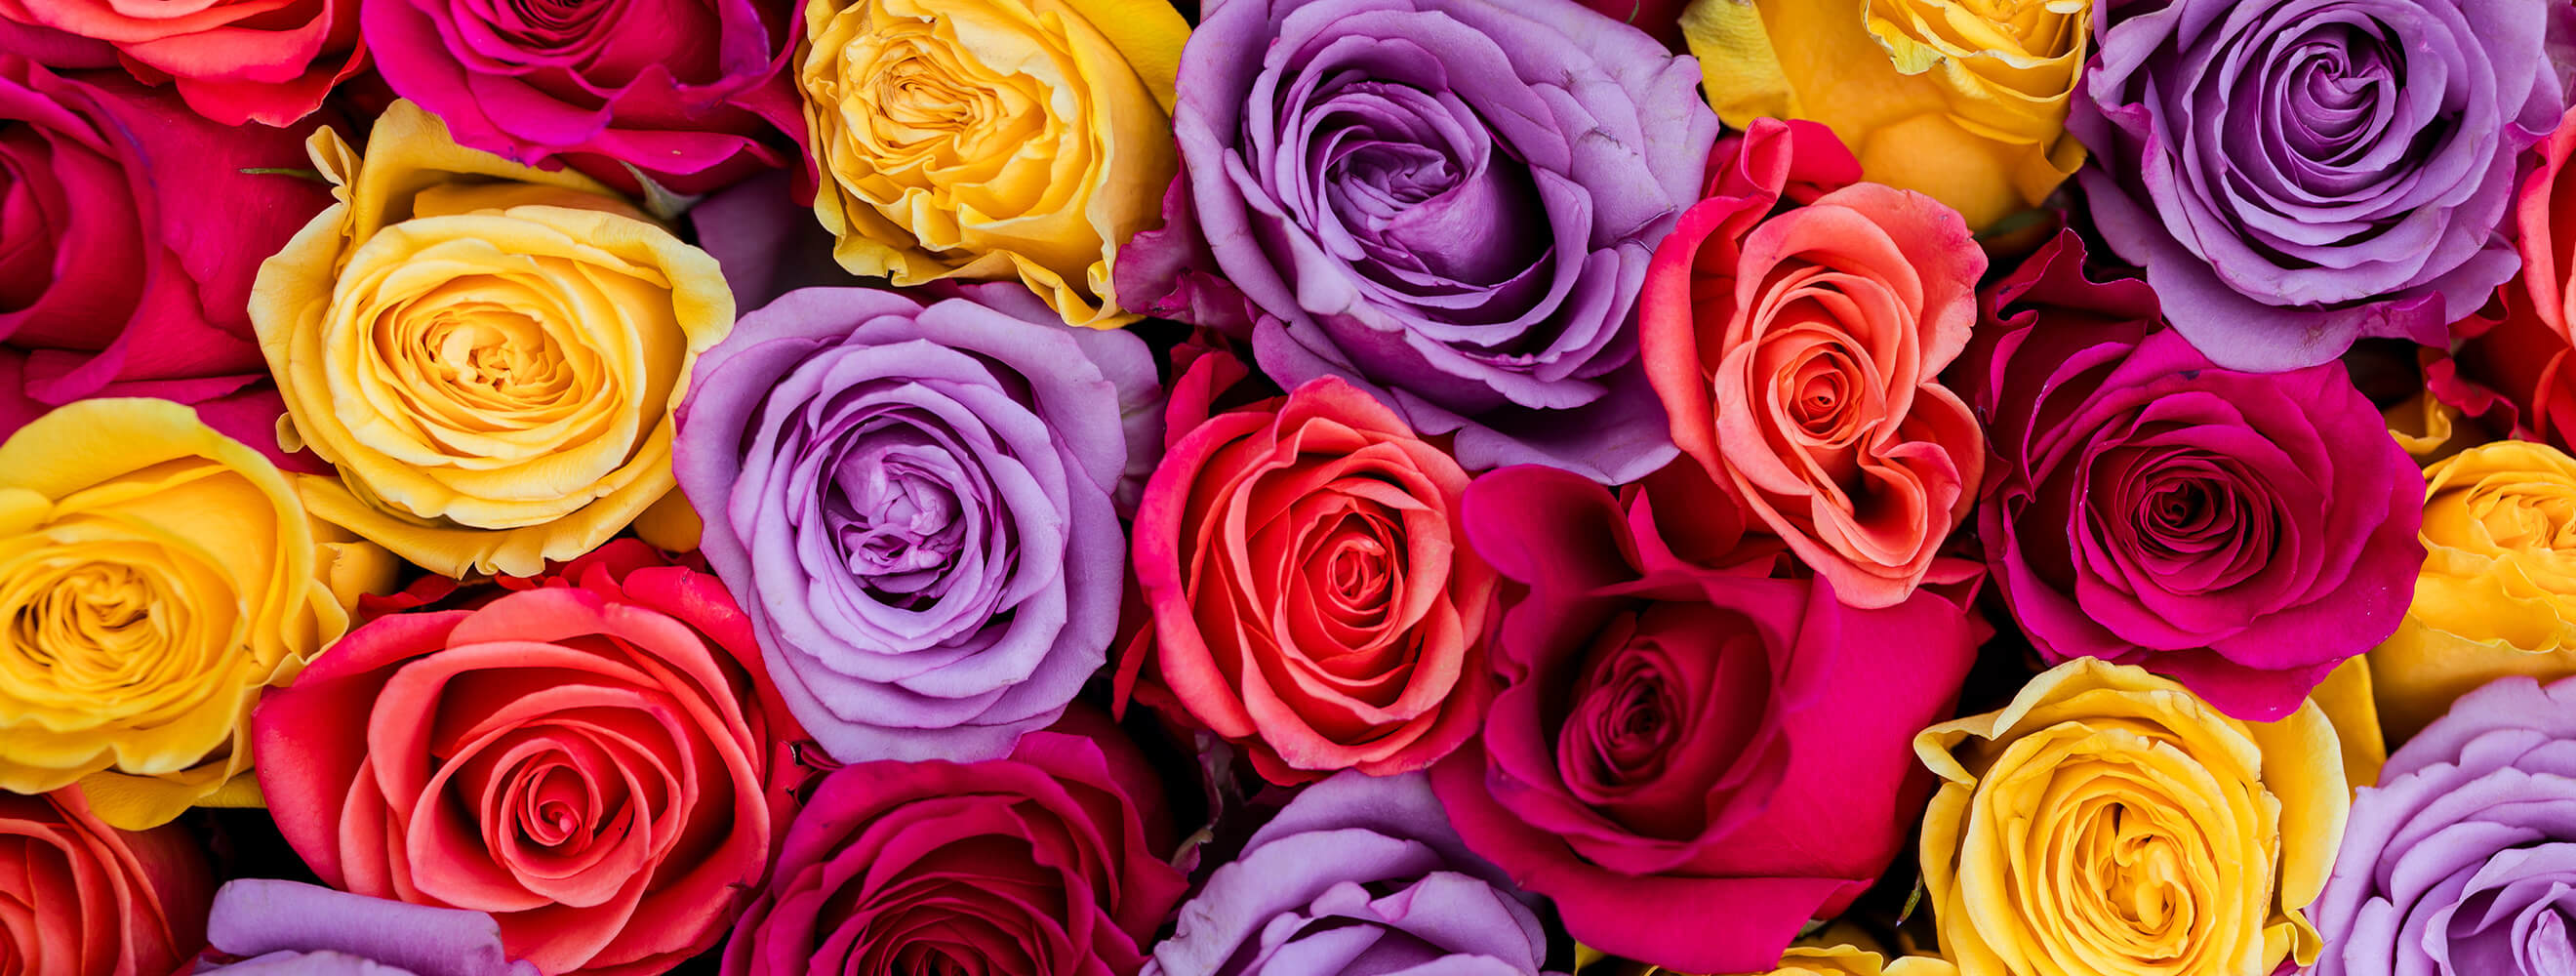 roses in a rainbow of colors yellow, purple, pink, and red.